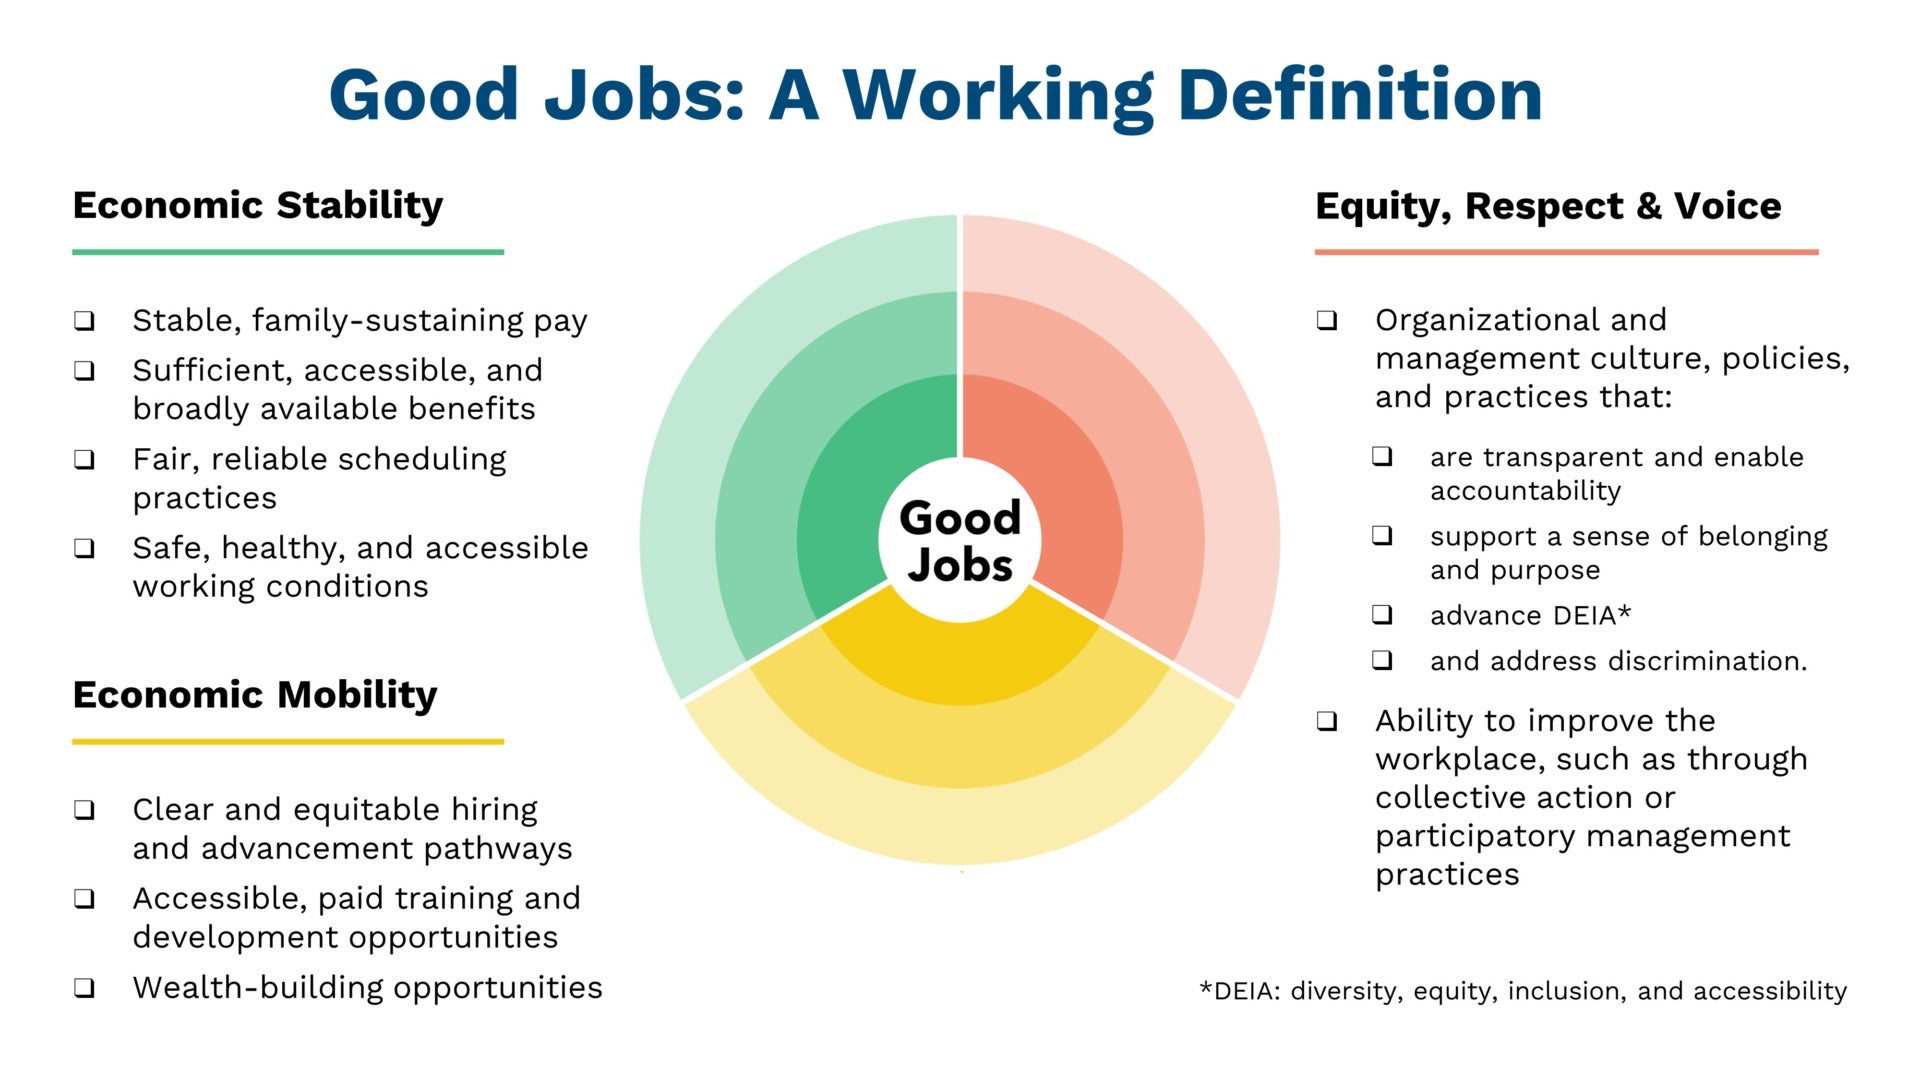 Pie chart visualizing three attributes of a good job: Economic Stability, Economic Mobility, and Equity, Respect & Voice. Each attribute includes several bullet points, which are described in detail at https://as.pn/goodjobs